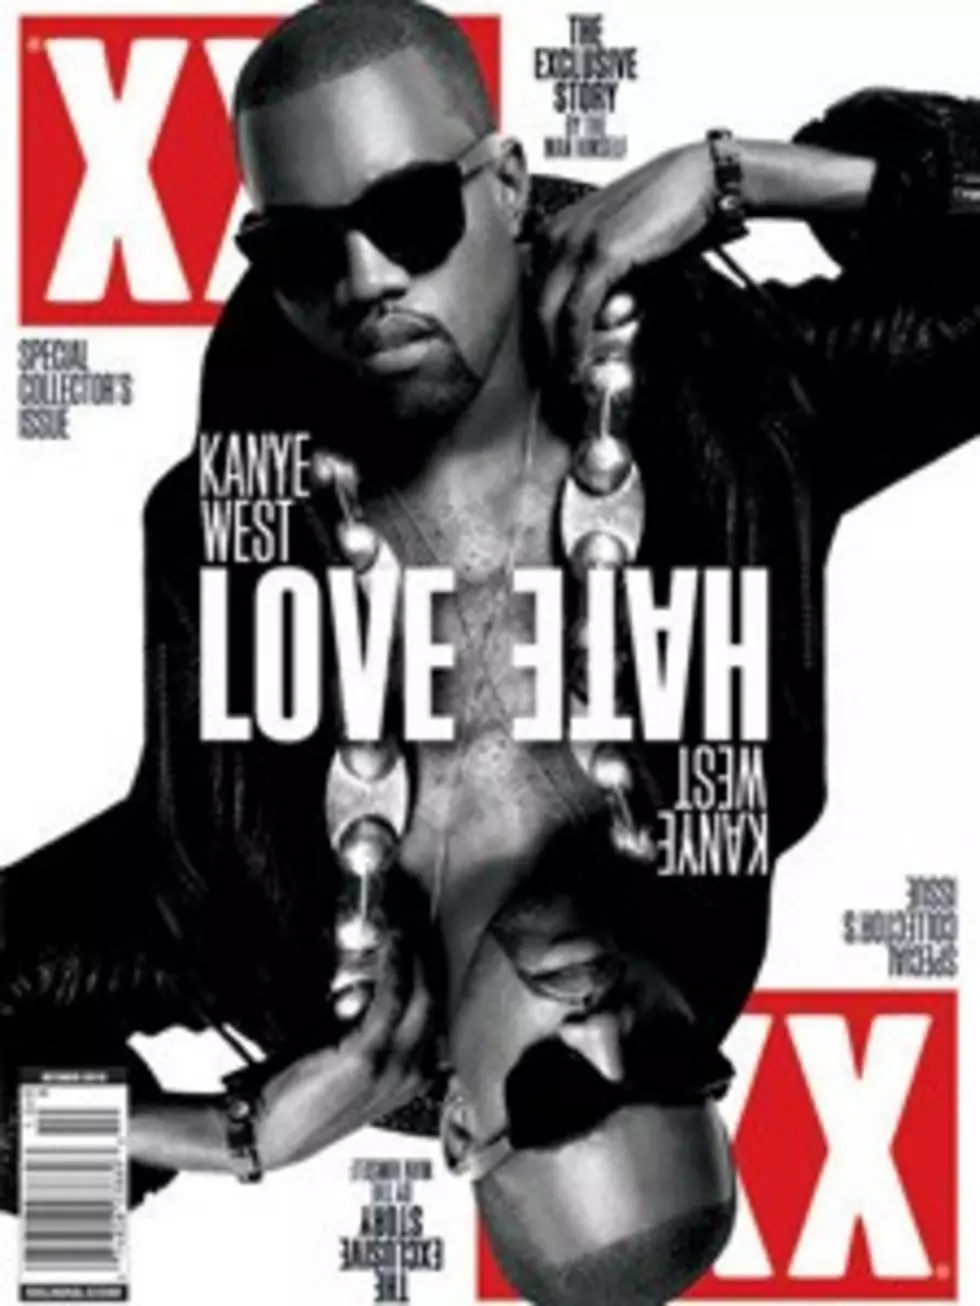 Kanye Pens His Own Cover Story